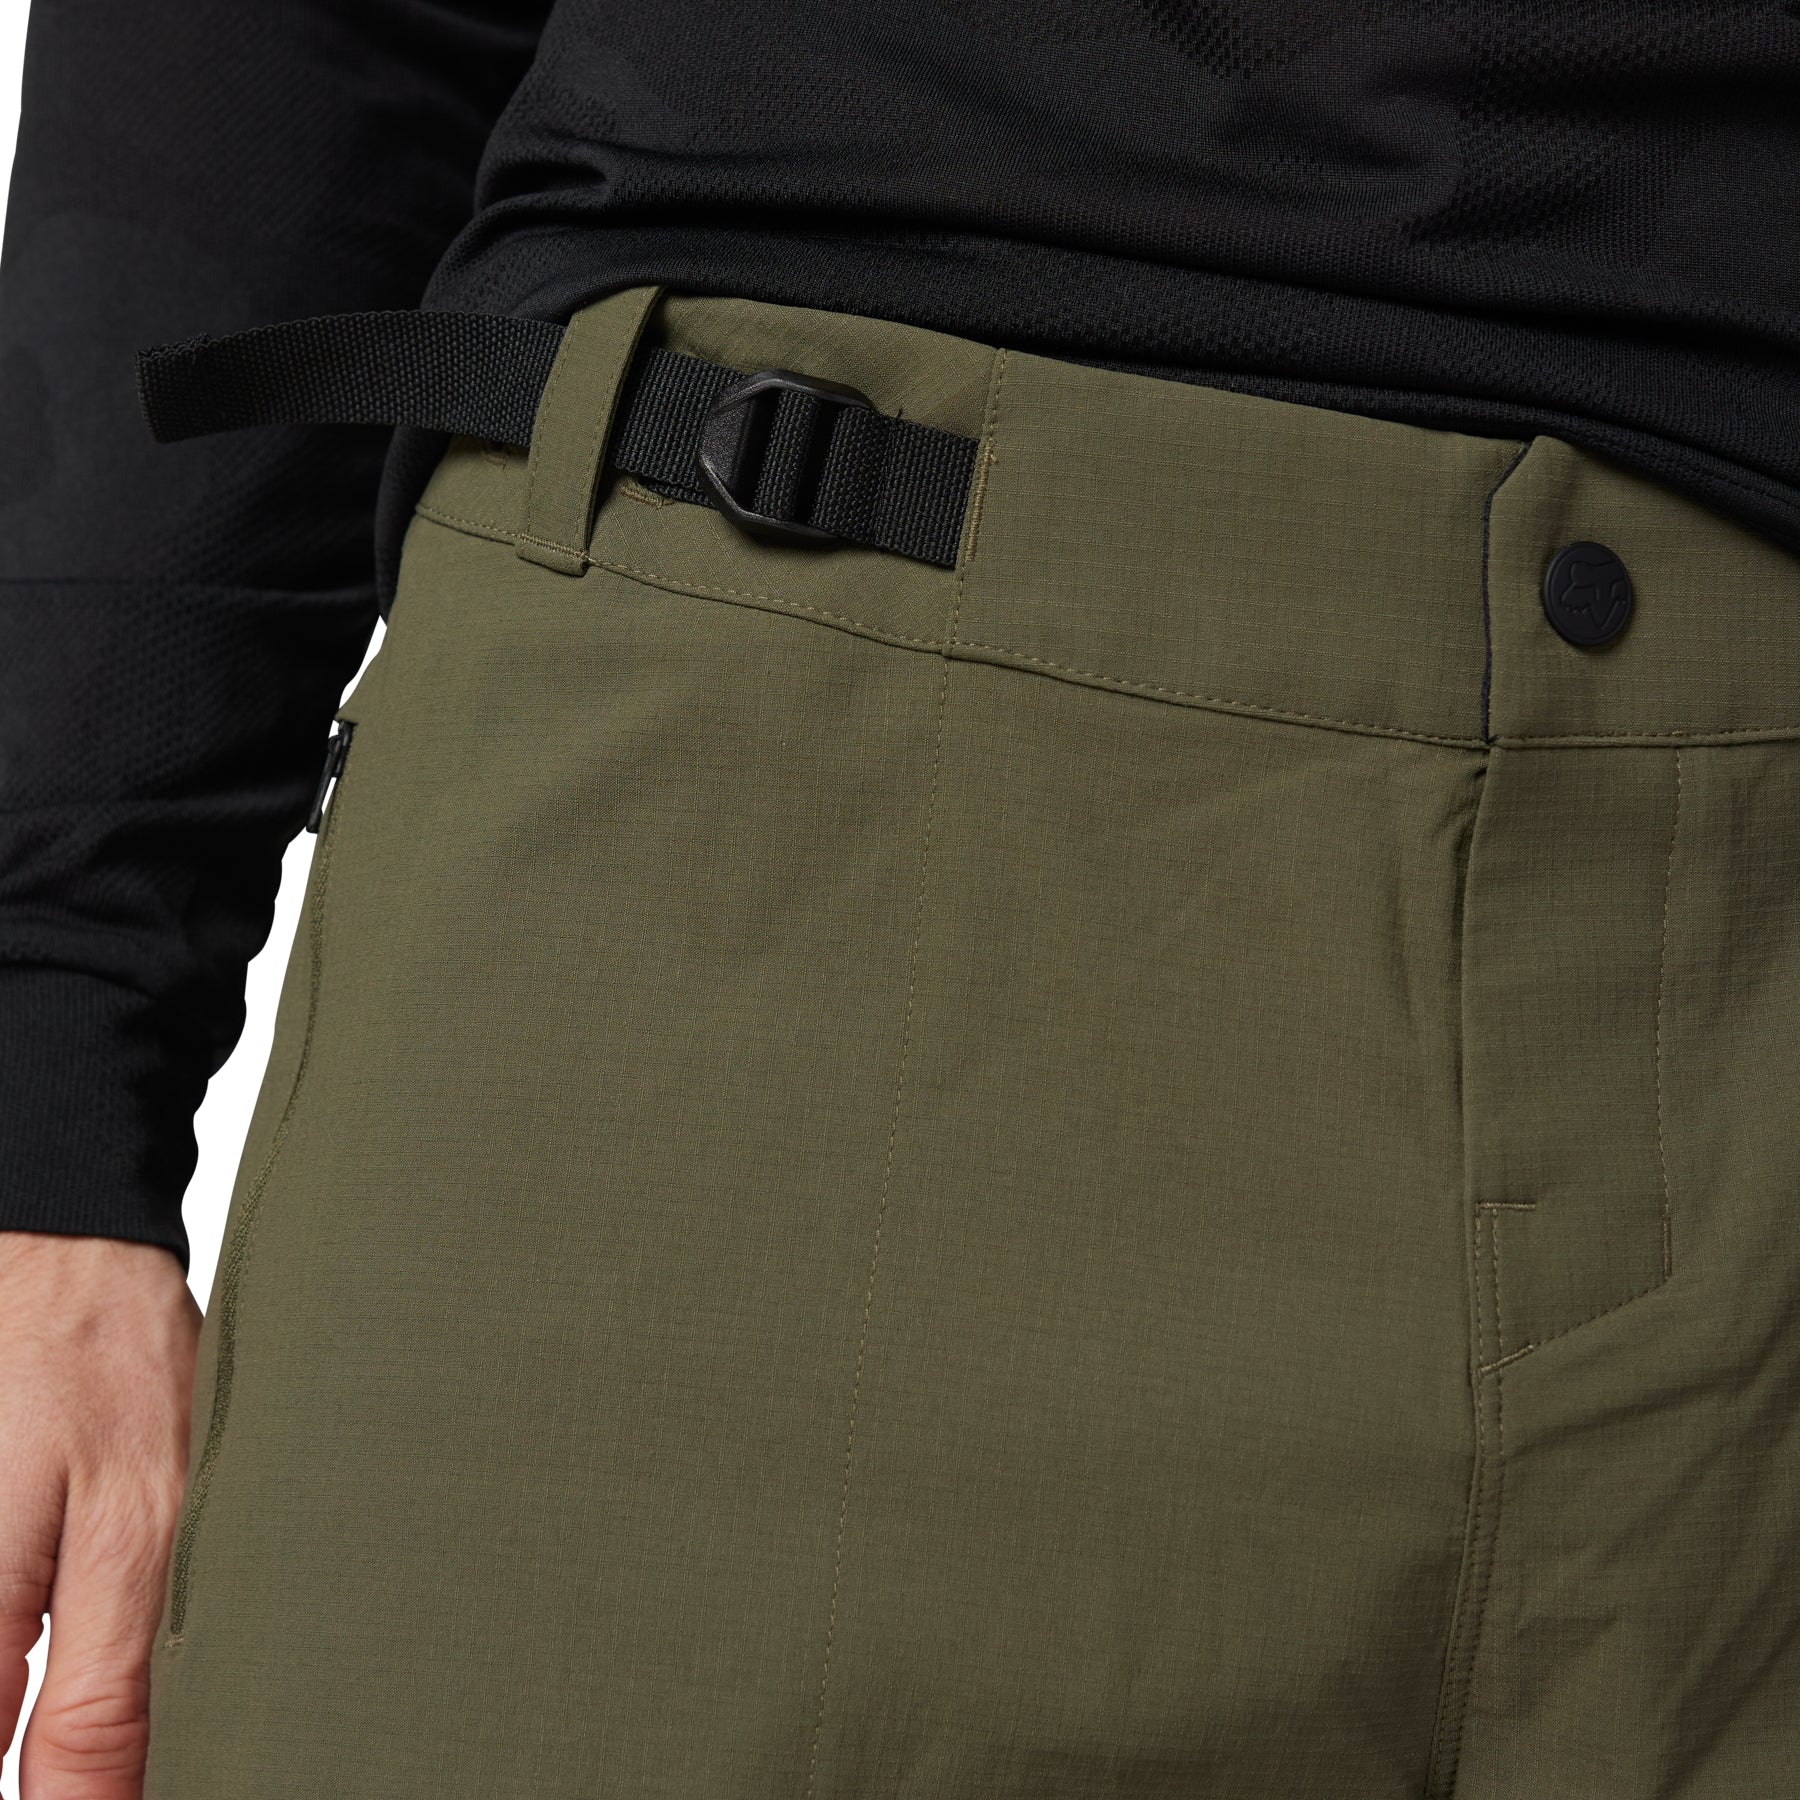 Fox Ranger Shorts Without Liner - L-34 - Olive Green - Image 4